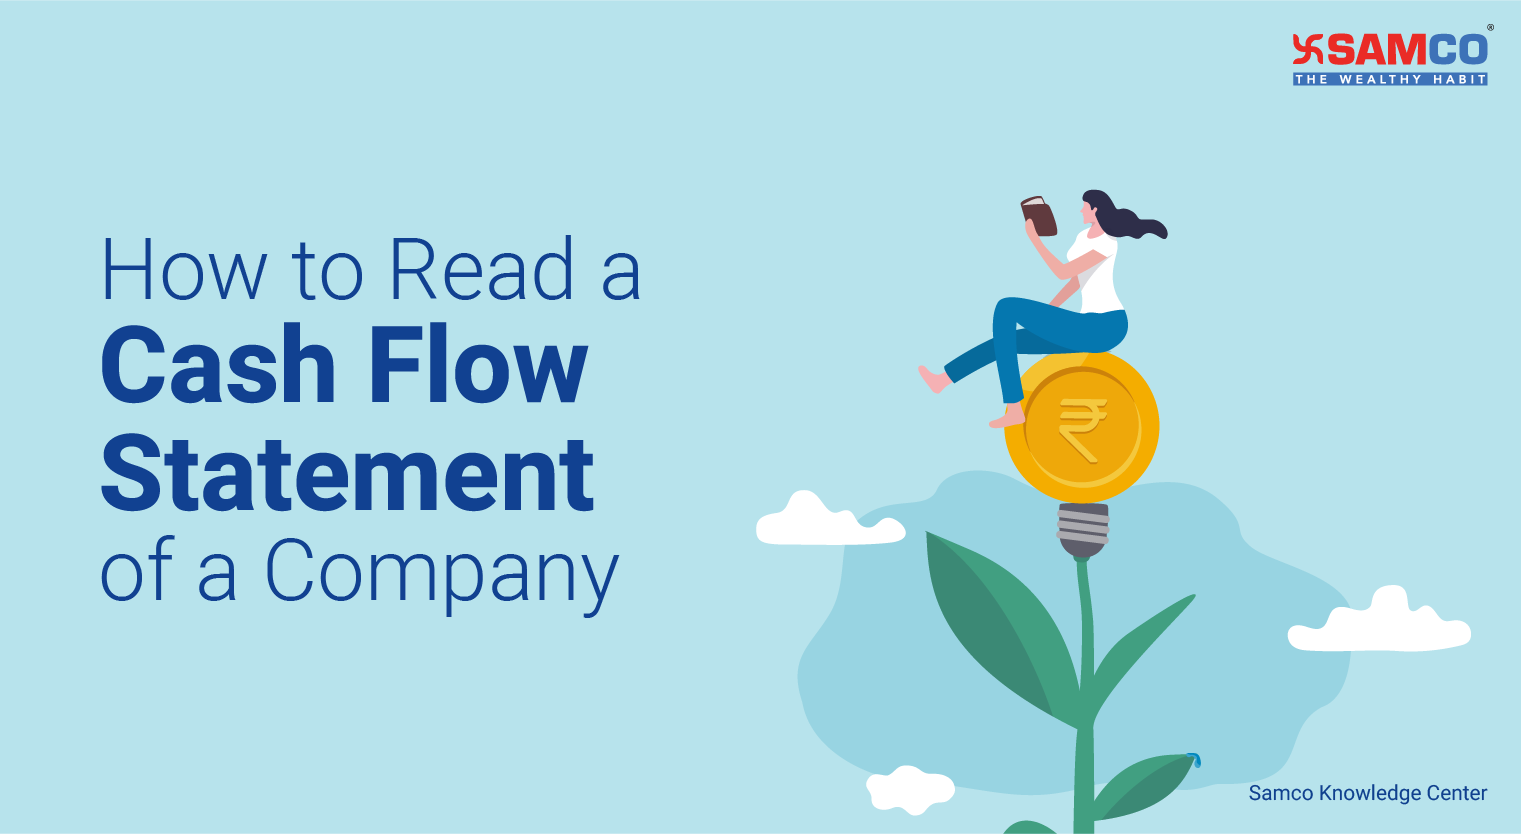 How to Read a Cash Flow Statement of a Company